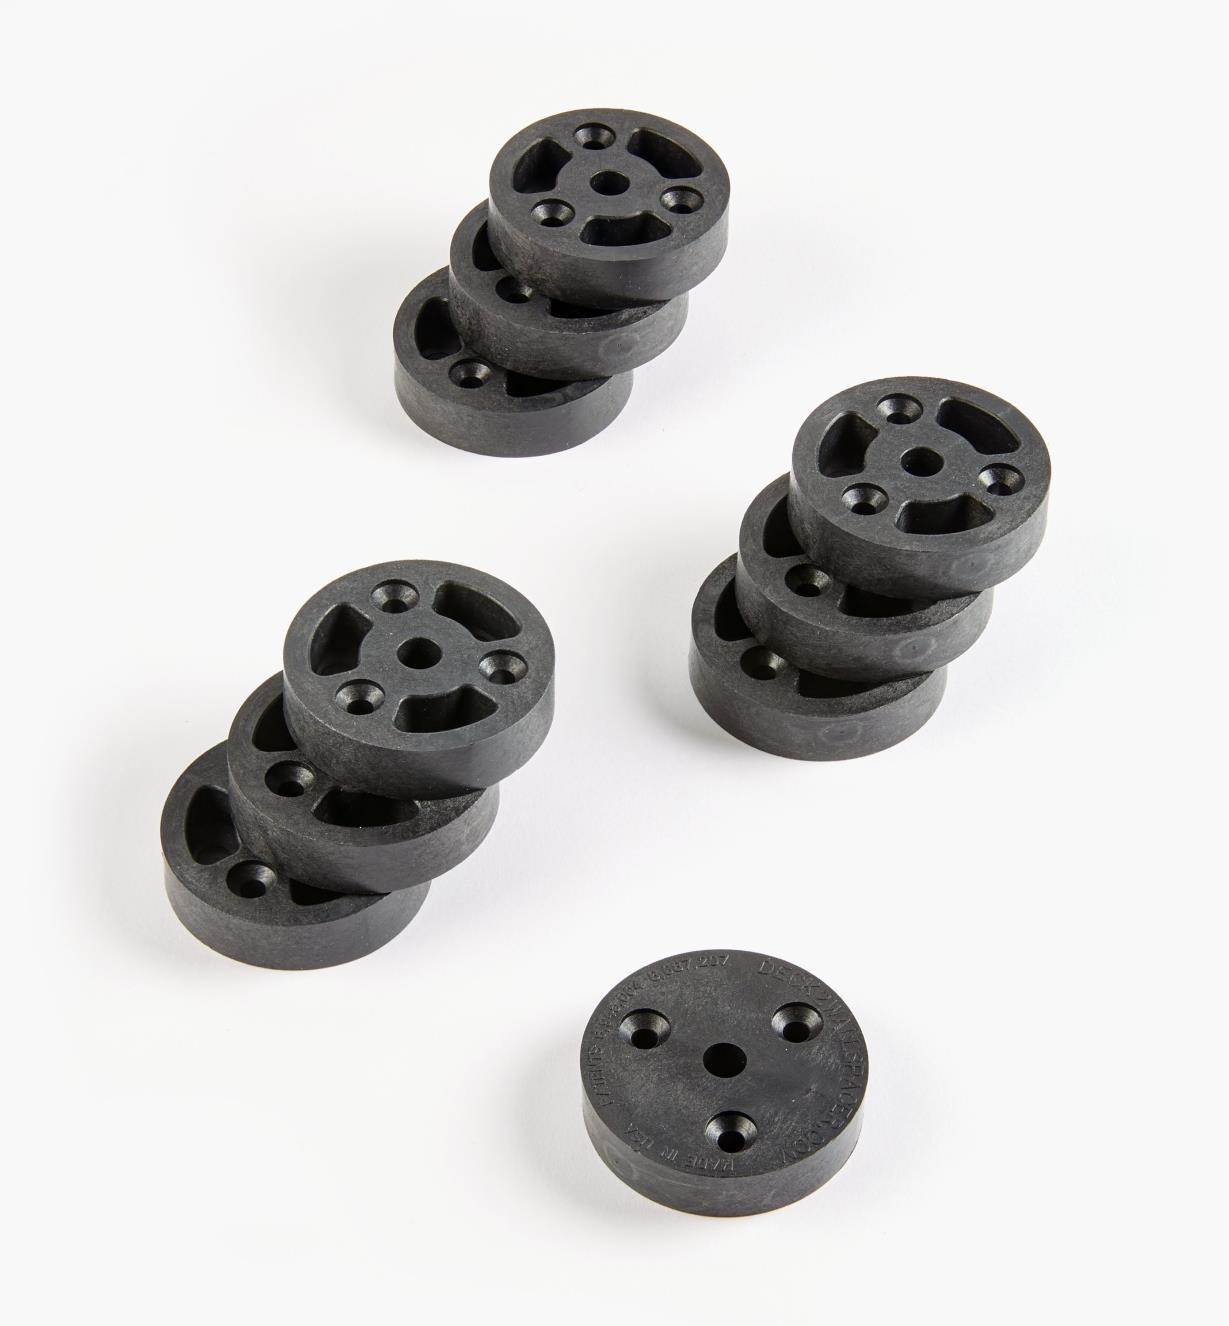 01S1420 - 1/2" × 2" Deck-to-Wall Spacers, pkg. of 10